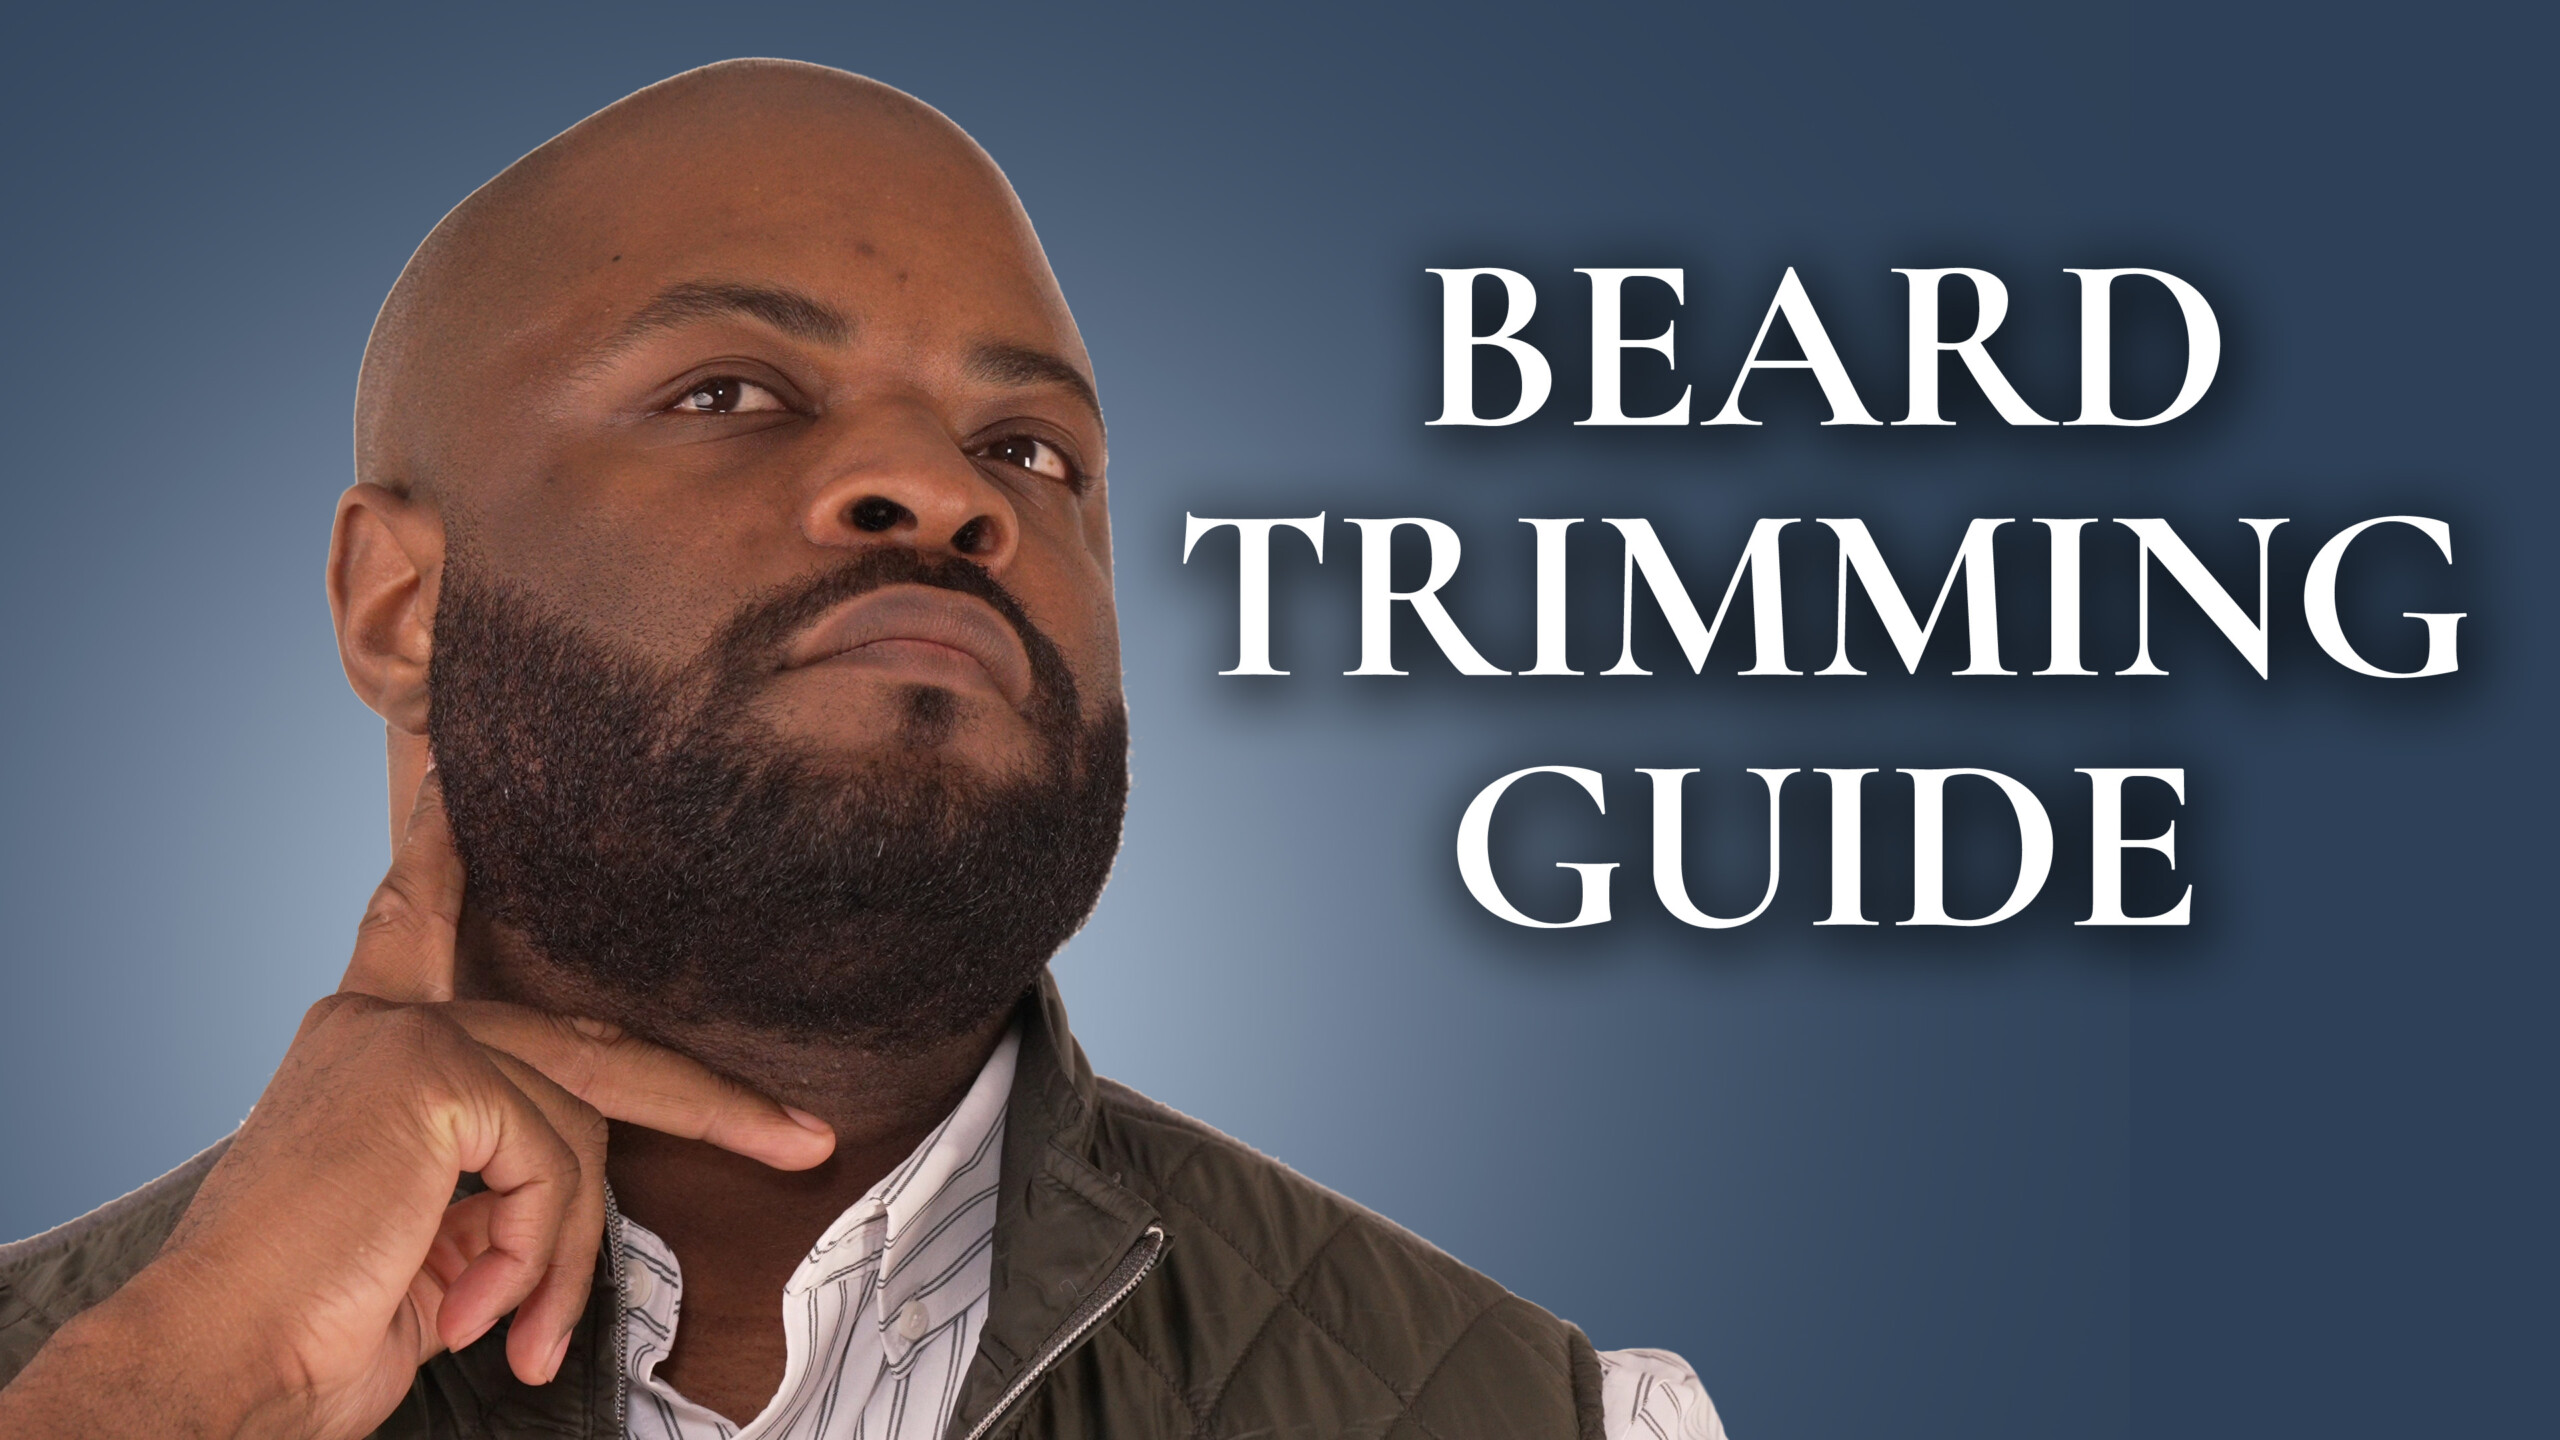 6. "Blonde Beard Care: Tips and Products for Maintaining a Healthy Beard" - wide 5